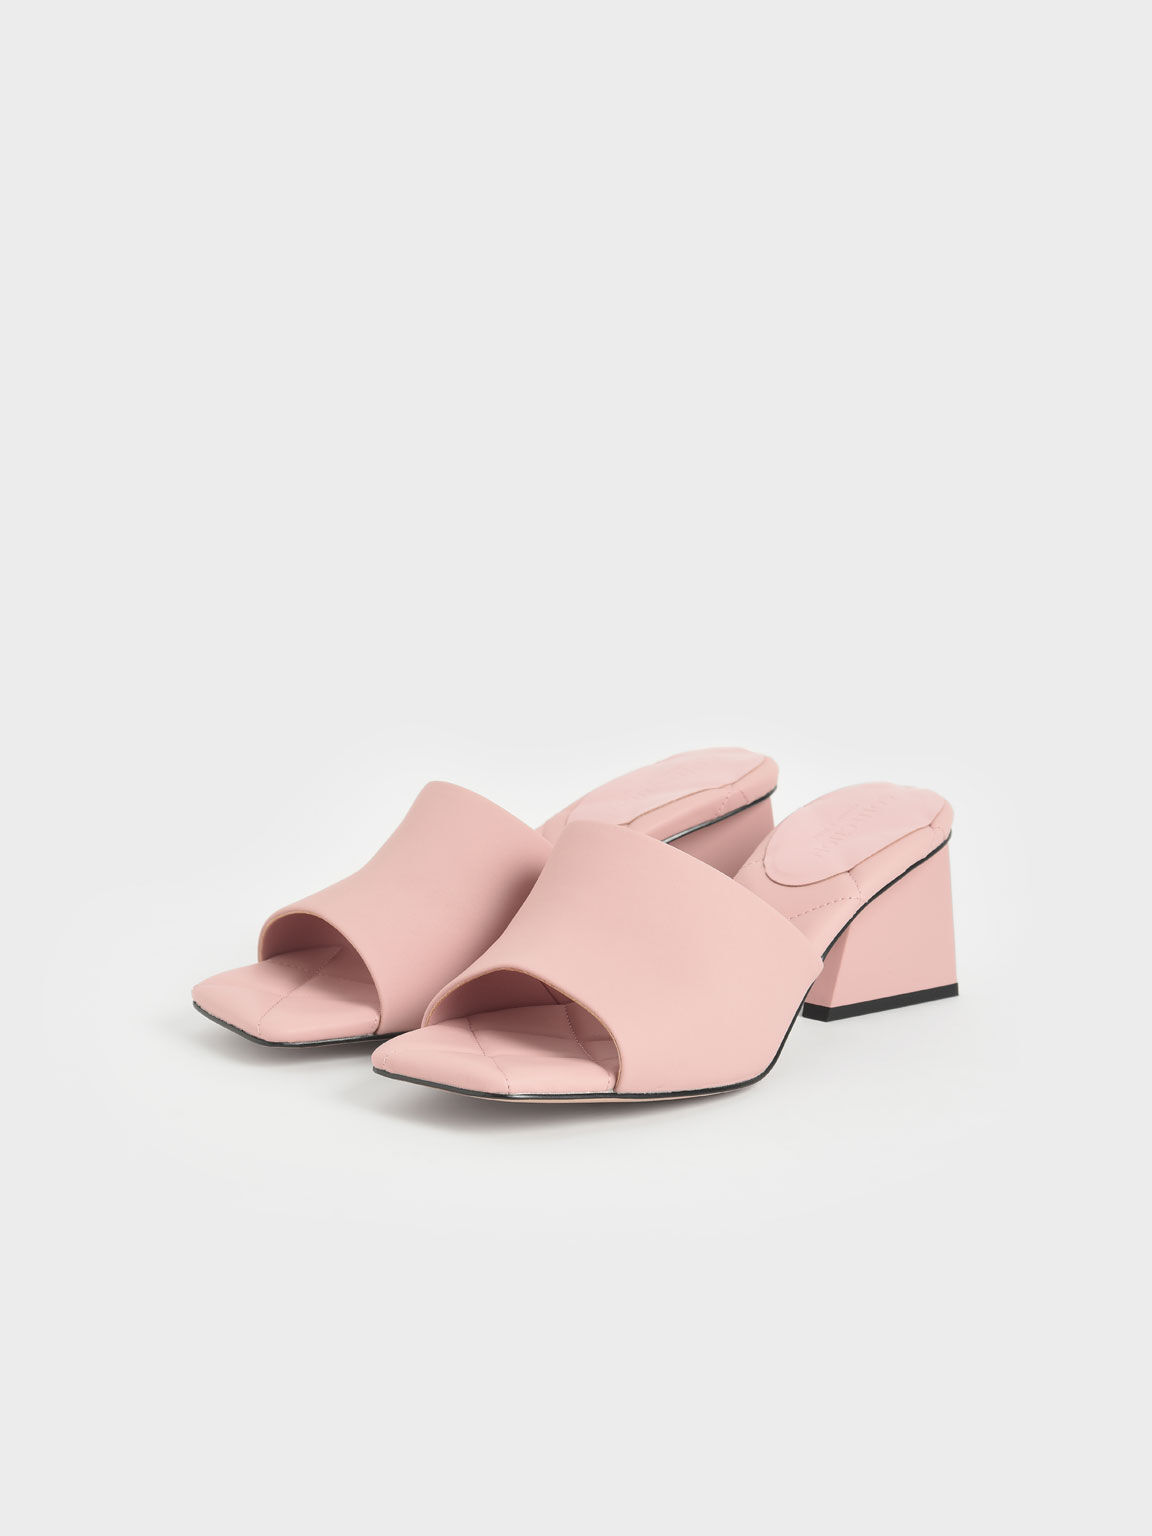 Sandal Leather Trapeze Heel Mules, Pink, hi-res